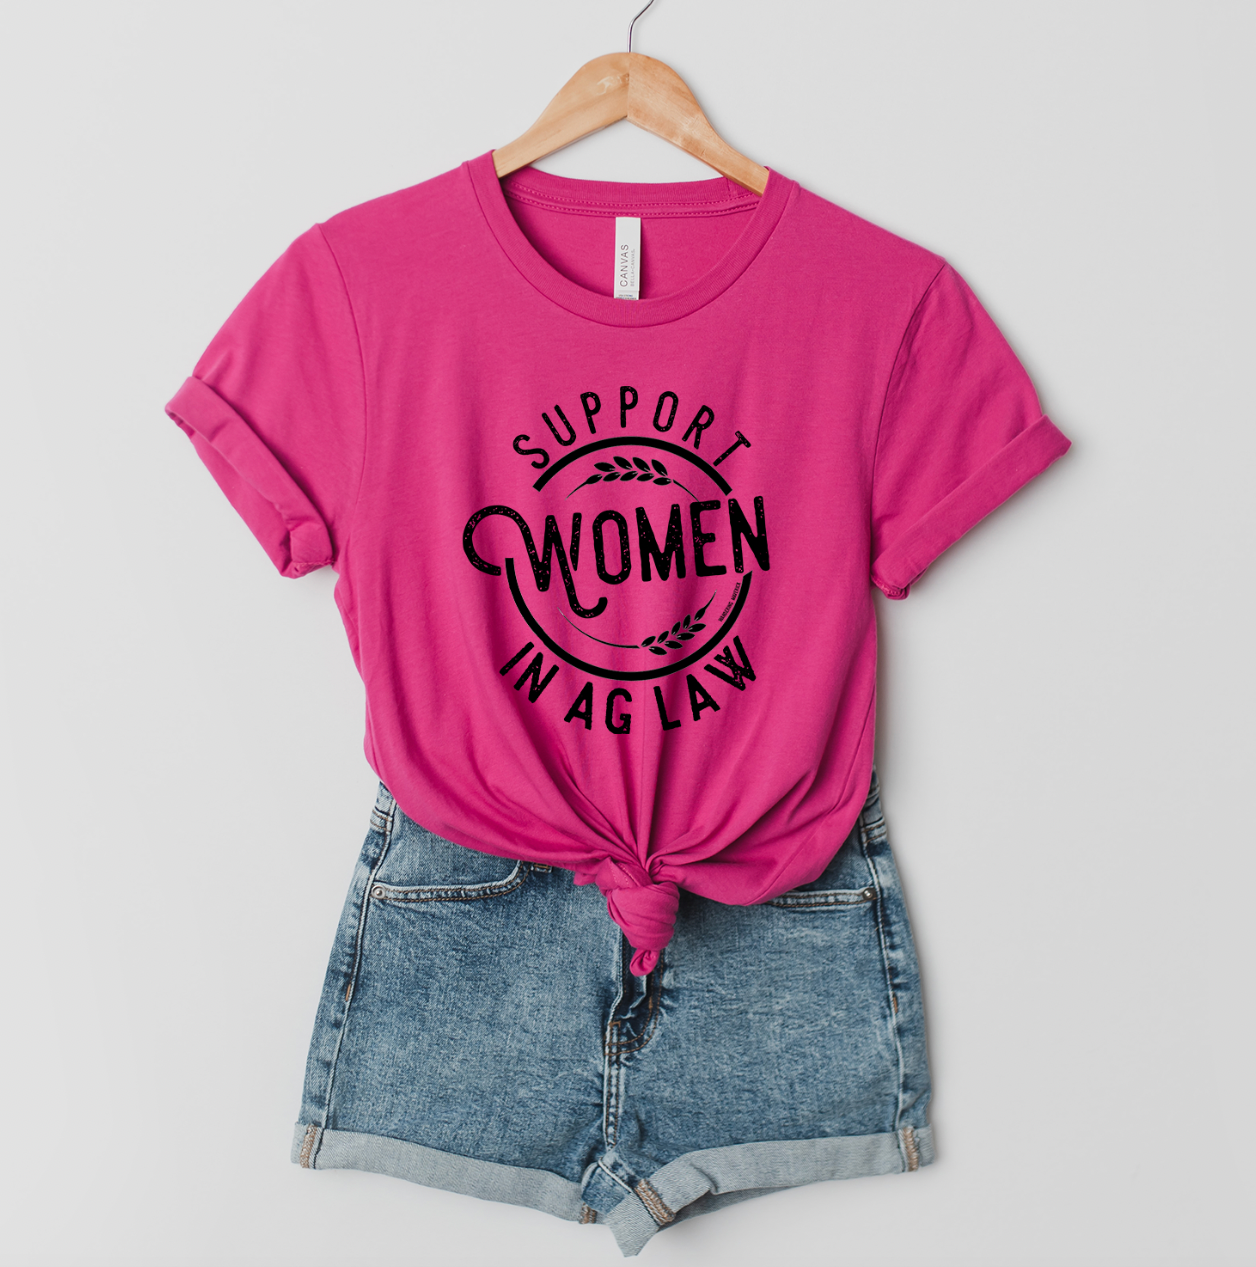 Support Women In Ag Law T-Shirt (XS-4XL) - Multiple Colors!